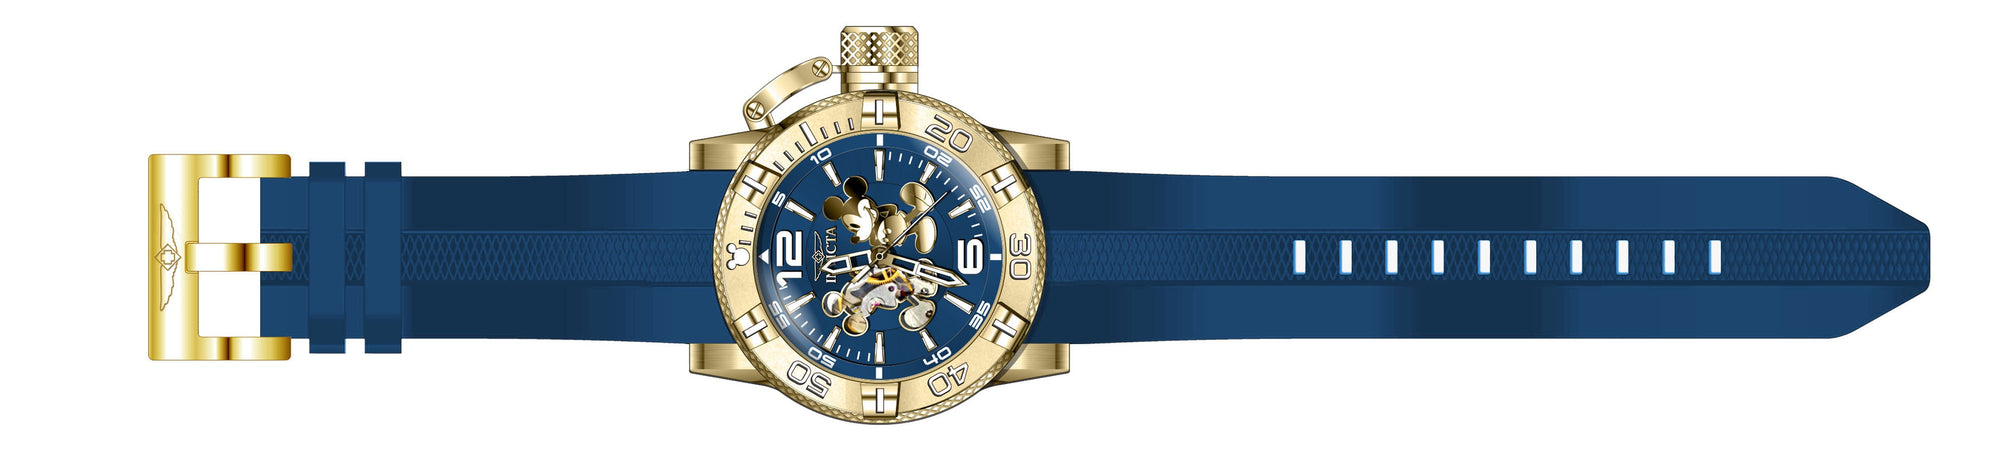 Band for Invicta Disney Limited Edition 23791